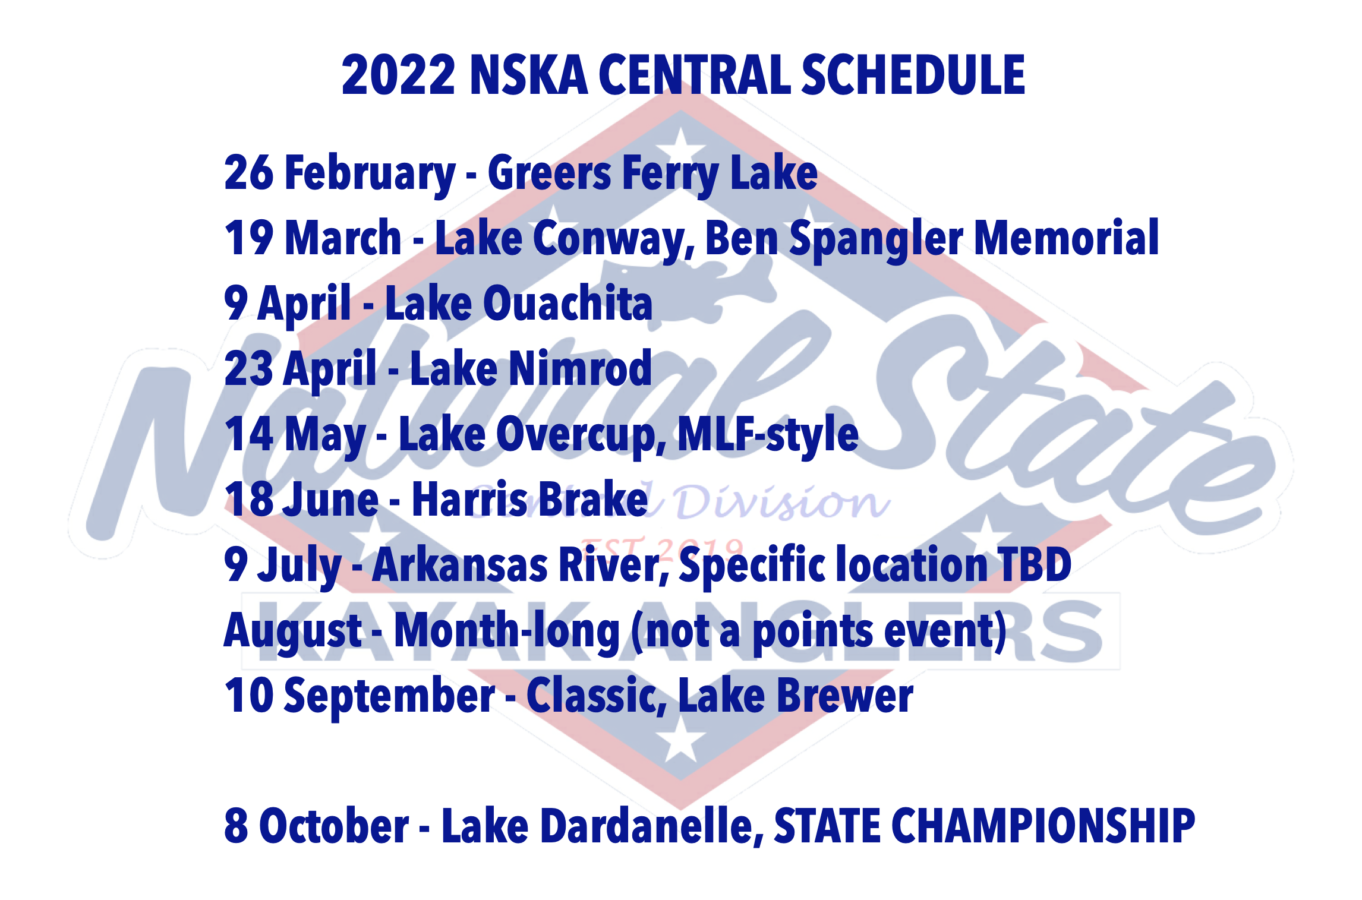 The 2022 schedule for NSKA